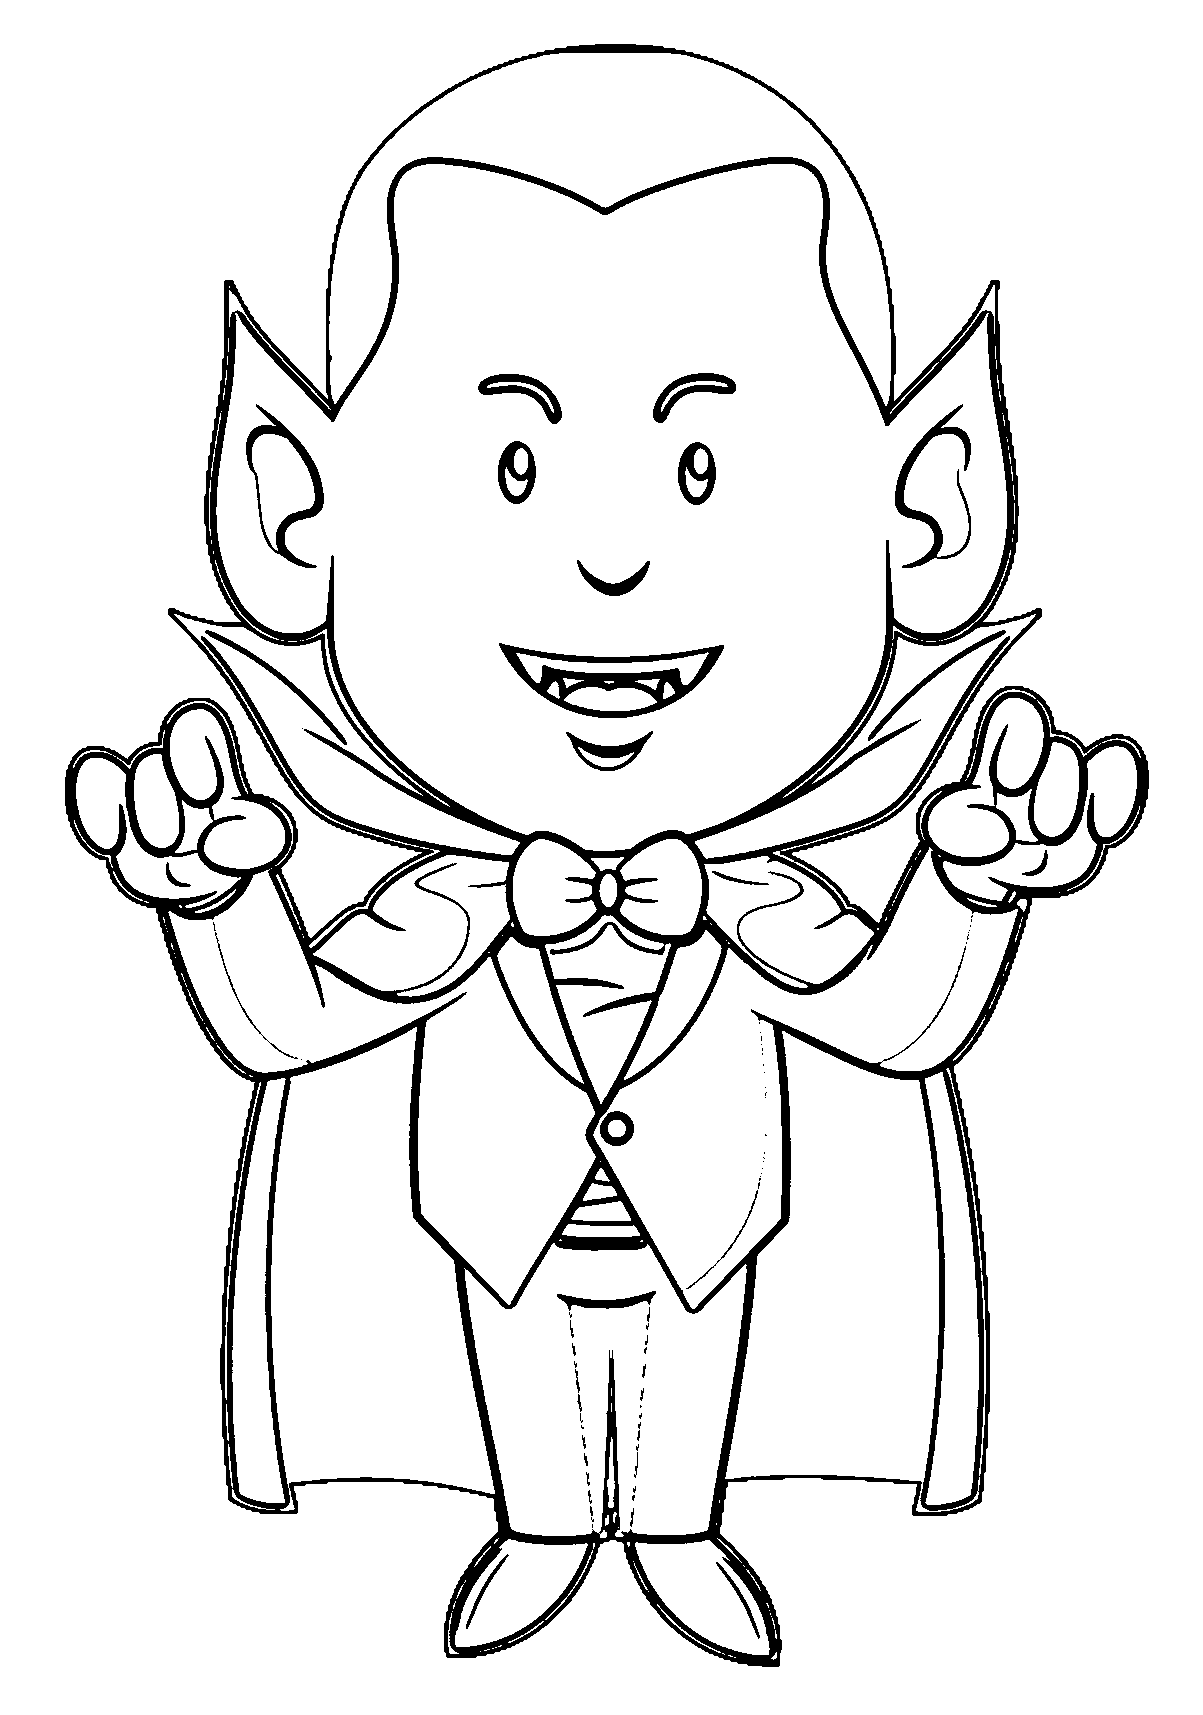 vampire coloring pages to print Coloring4free